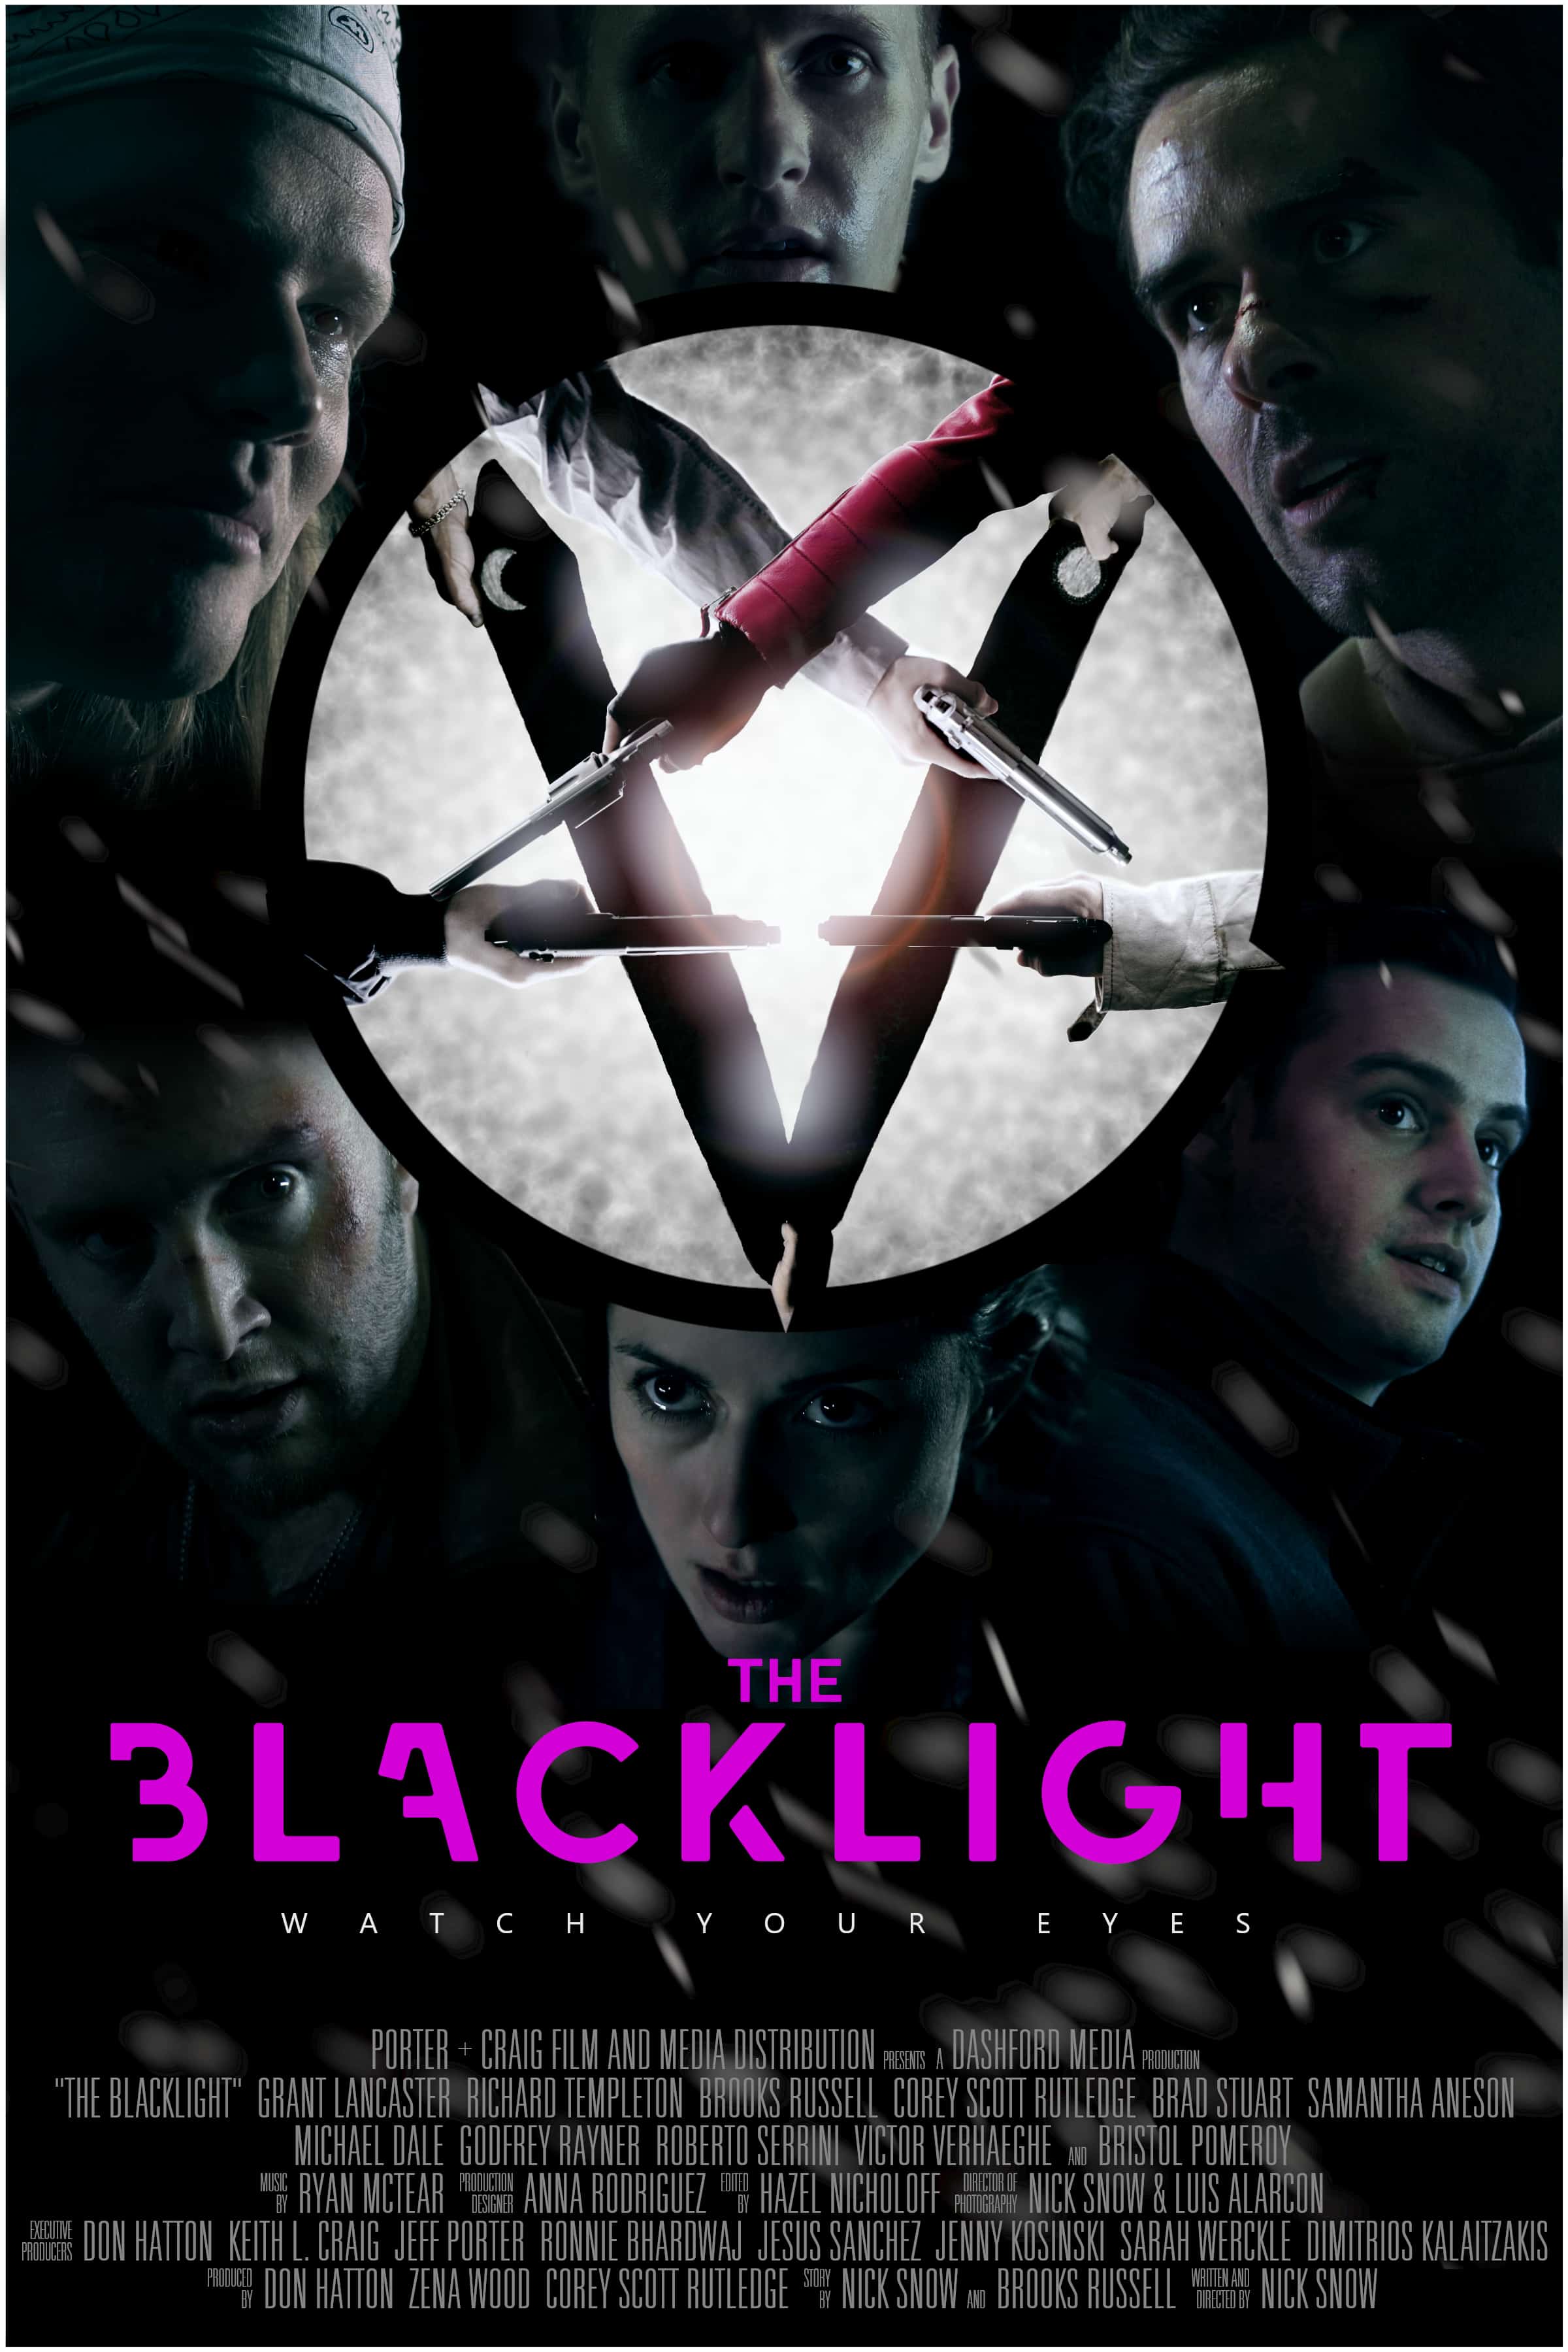 Introducing "The Blacklight": A Supernatural Thriller by Dashford Media and Director Nick Snow 26